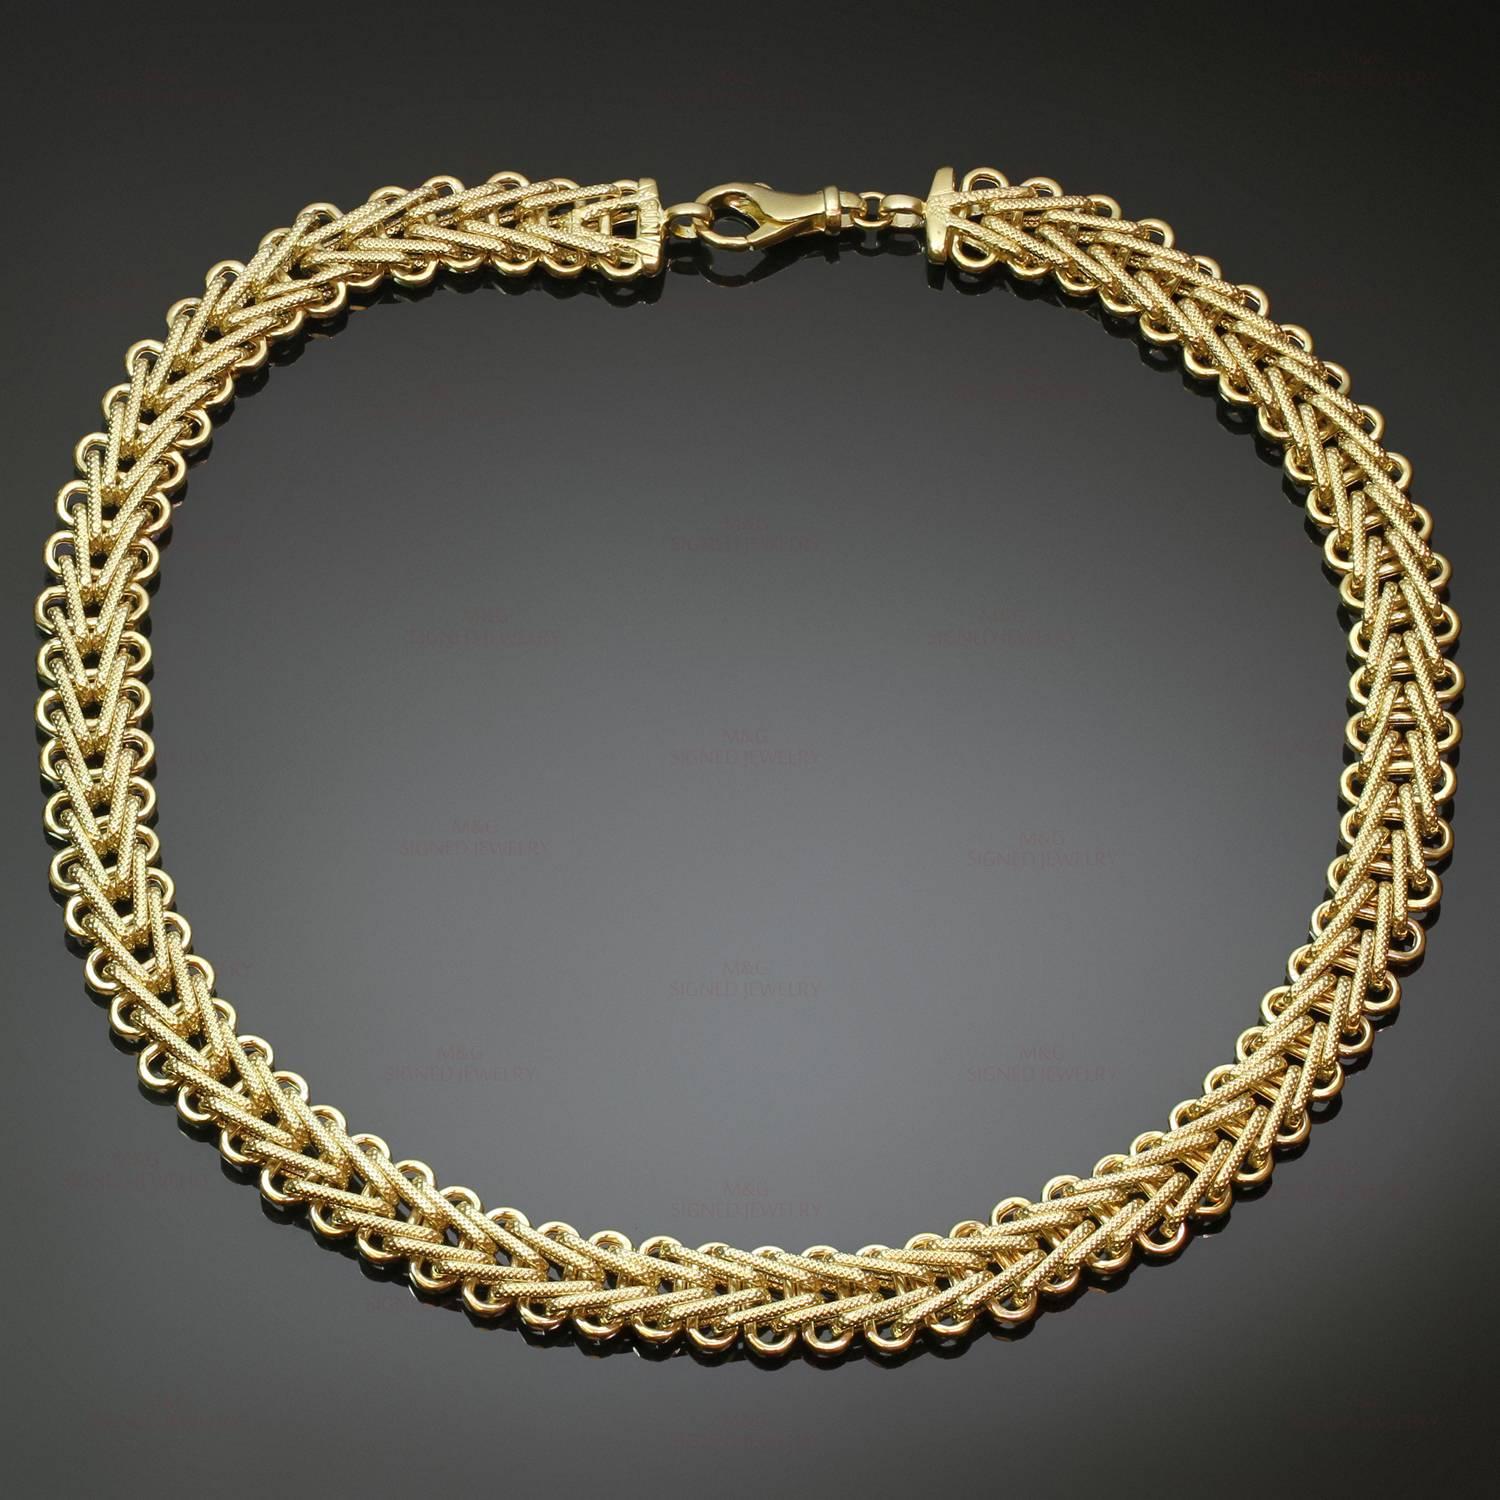 This stunning retro estate necklace features a wide braided design crafted 14k yellow gold and completed with a lobster claw clasp. Made in United States circa 1980s. Measurements: 0.47